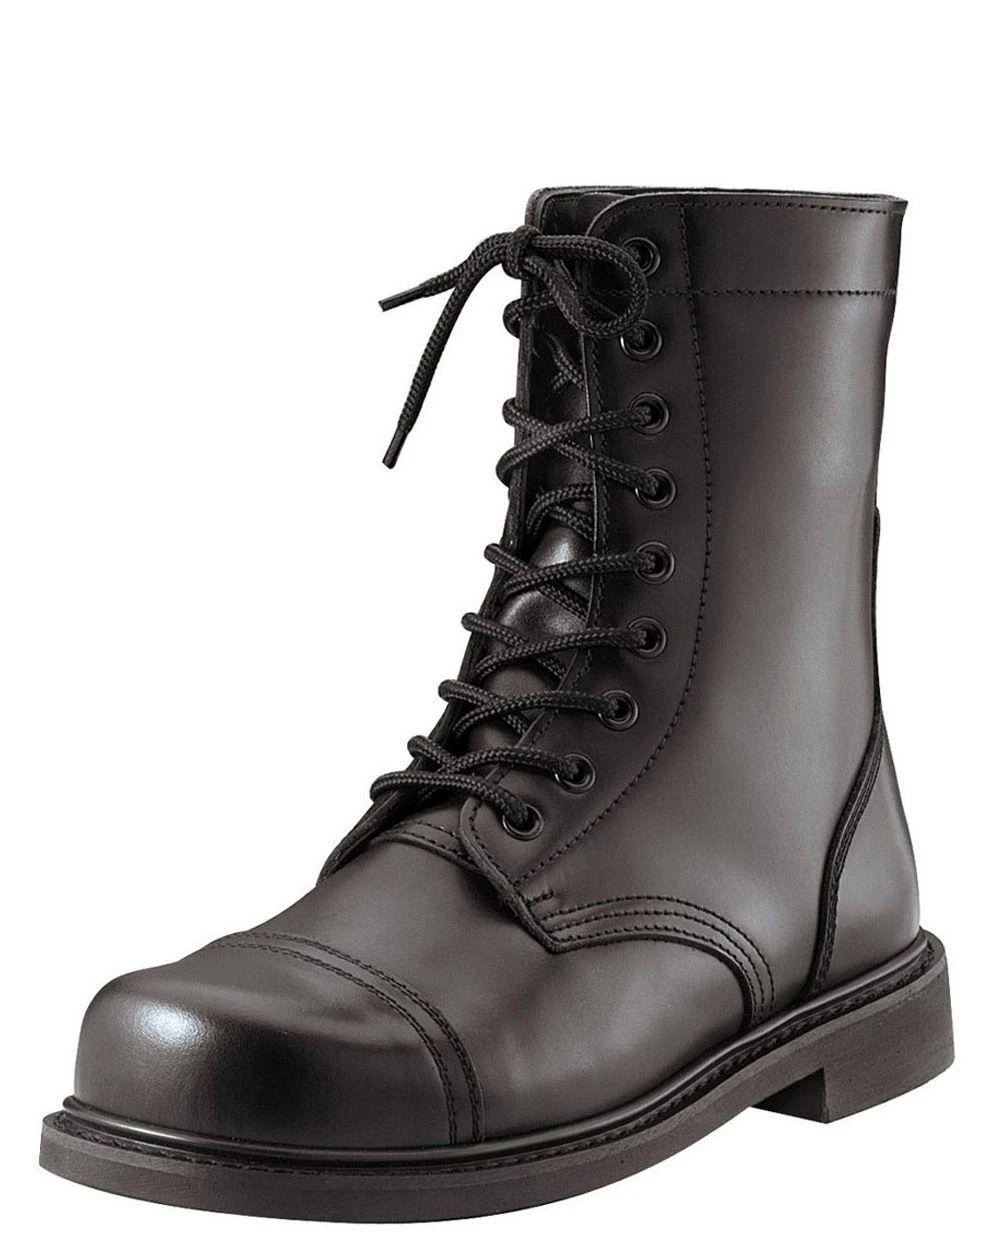 Køb Rothco Classic Combat Boots | Fri Fragt over 700 | ARMY